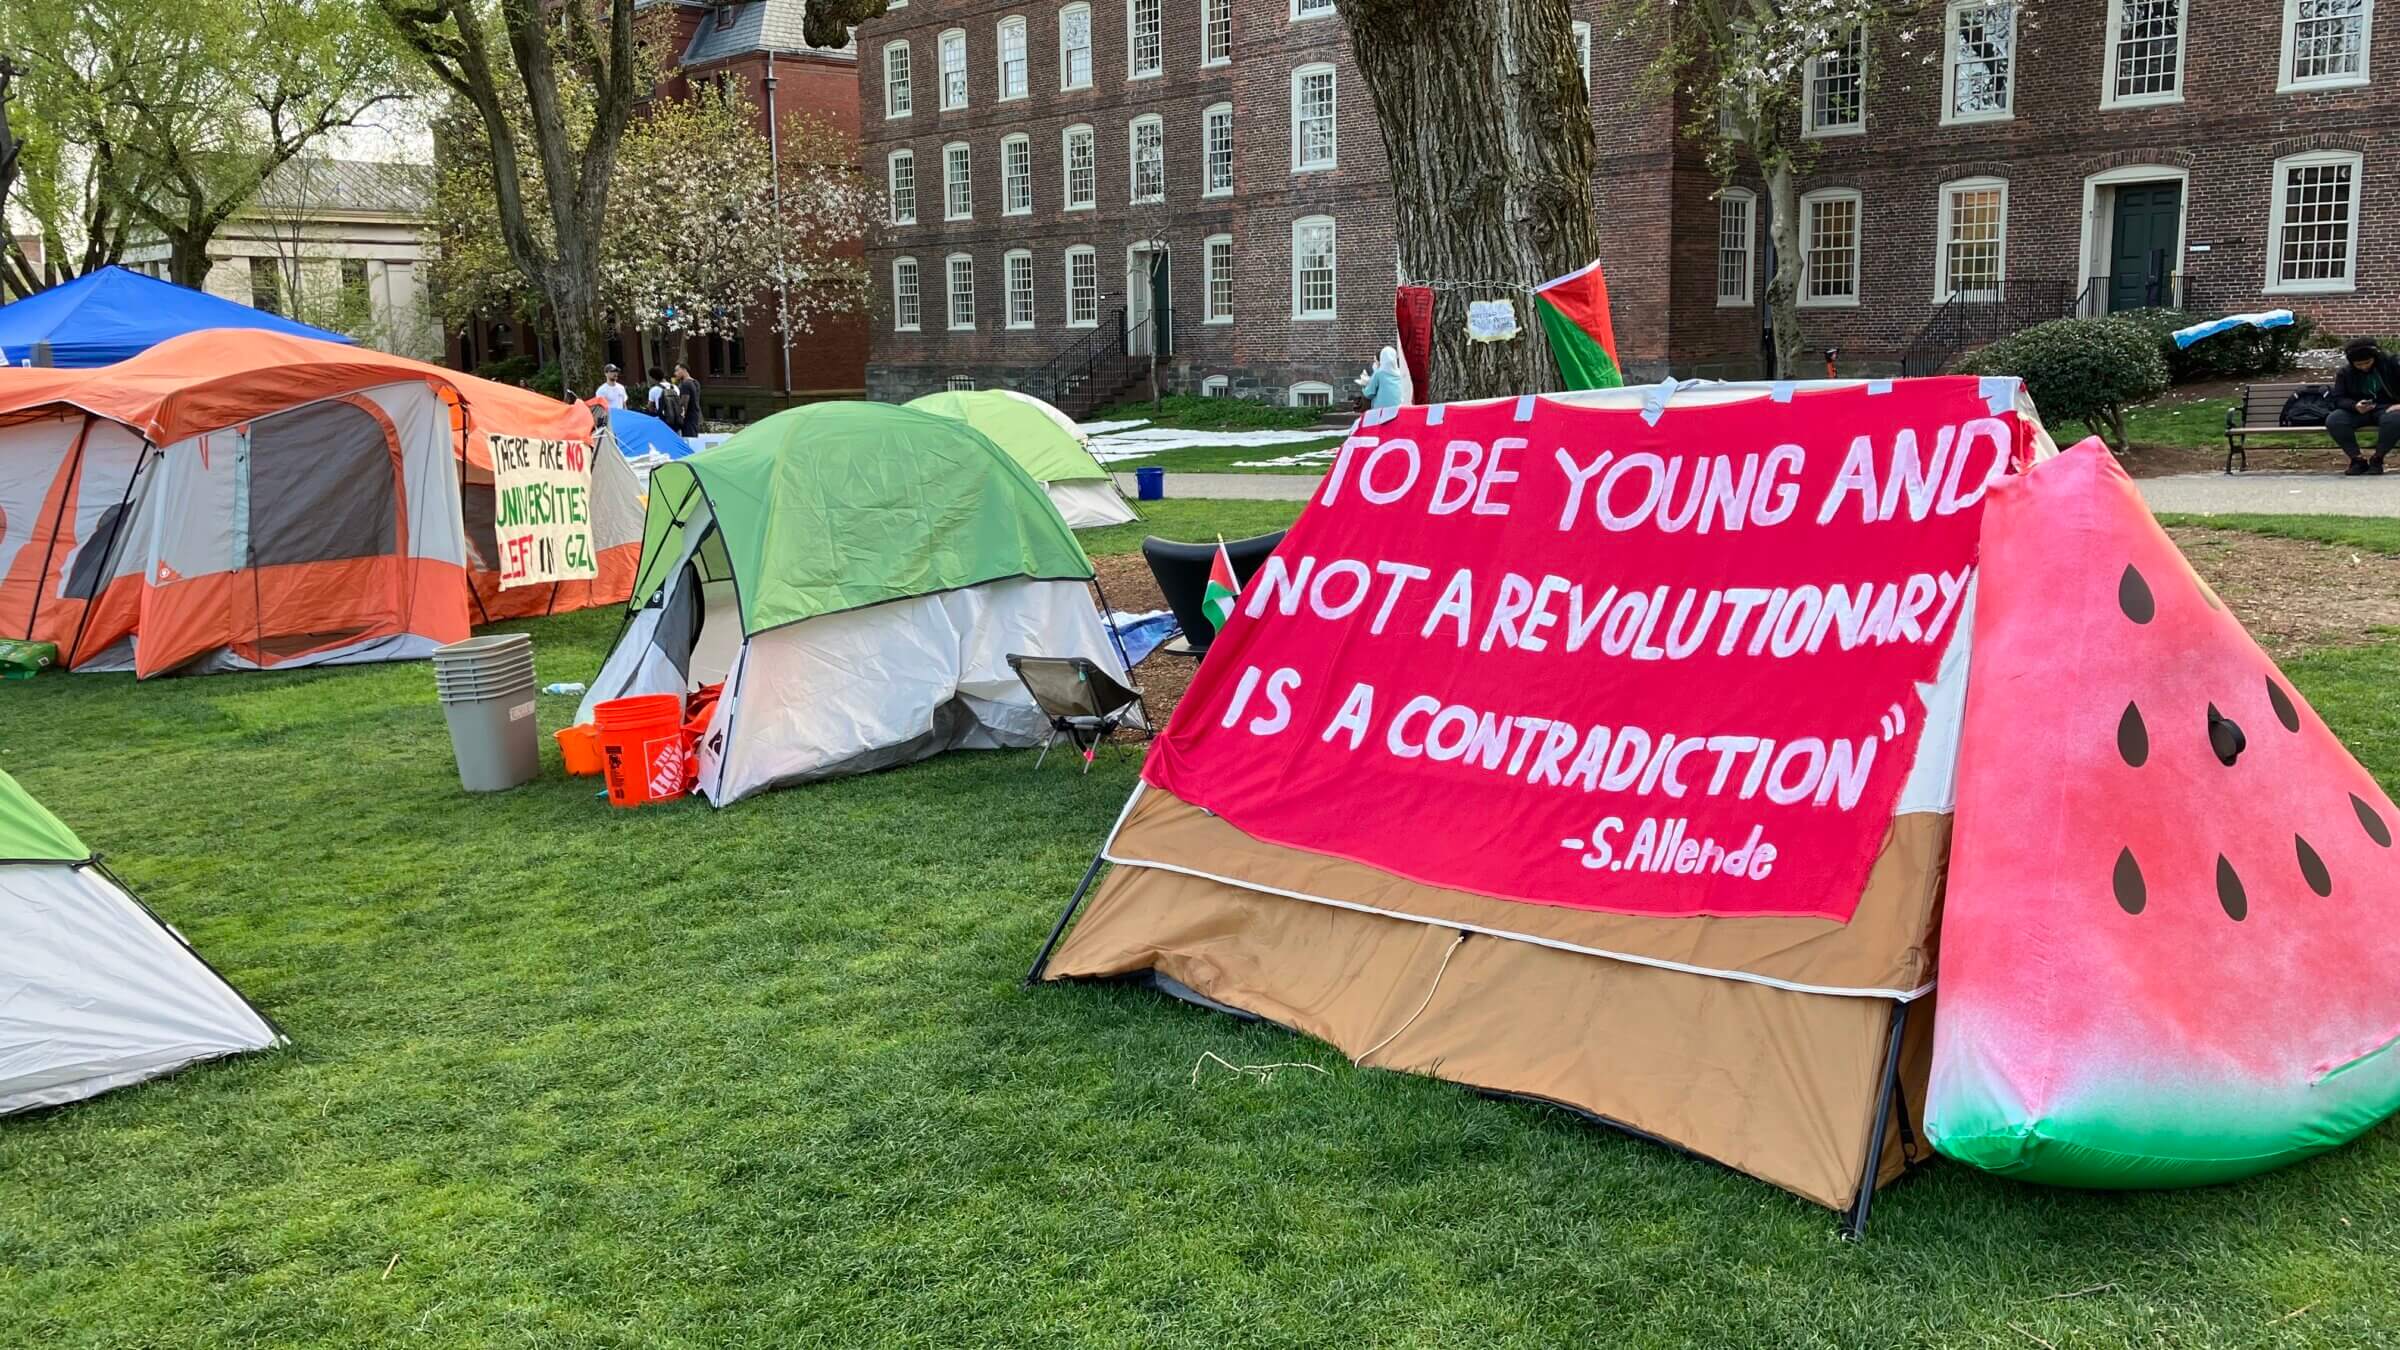 A sign at Brown's encampment highlights students' idealism.